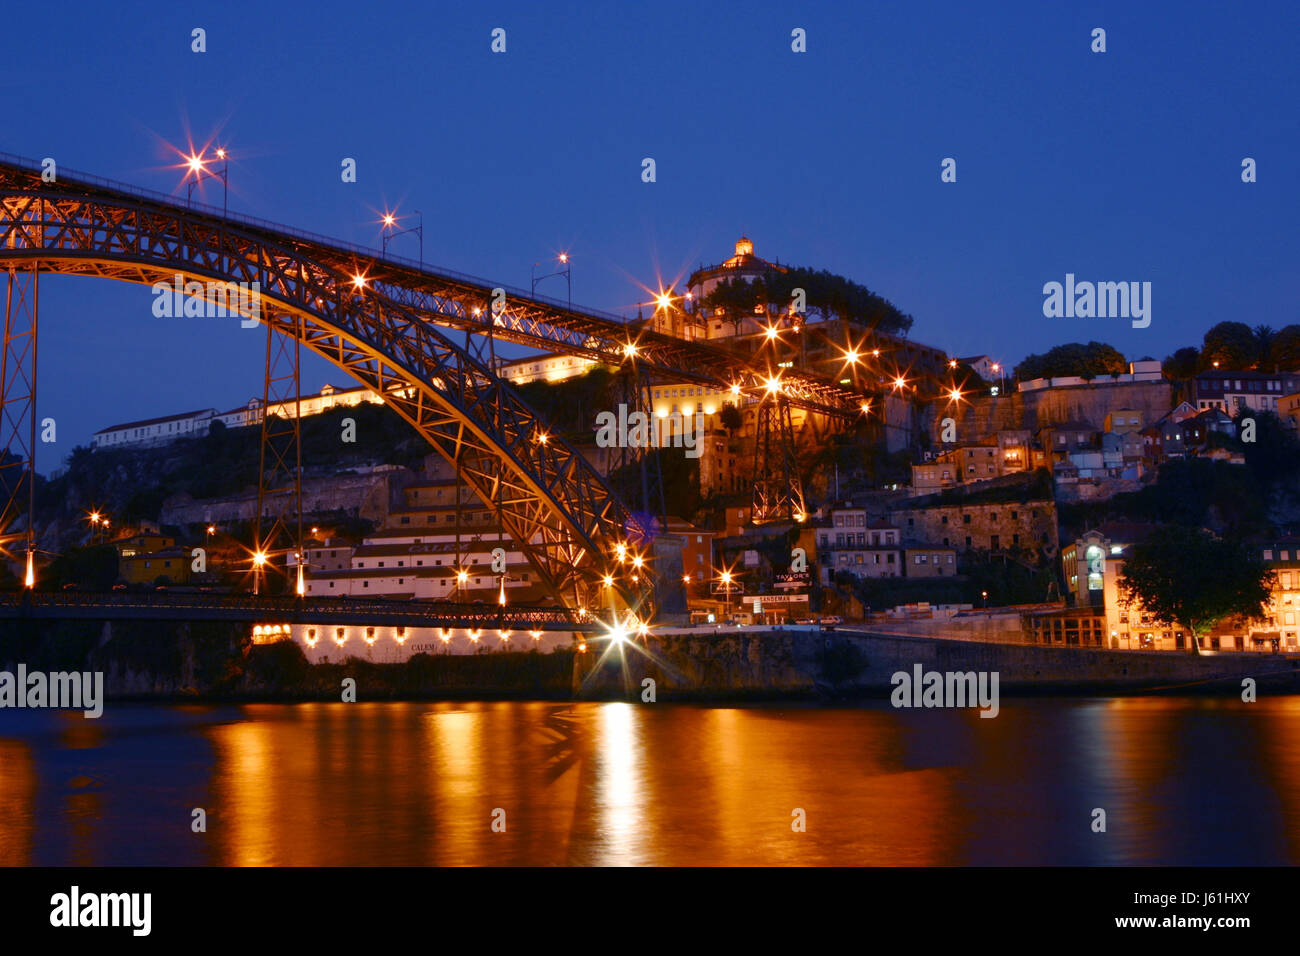 bridge portugal postage city town metropolis waters cathedral sights old town Stock Photo